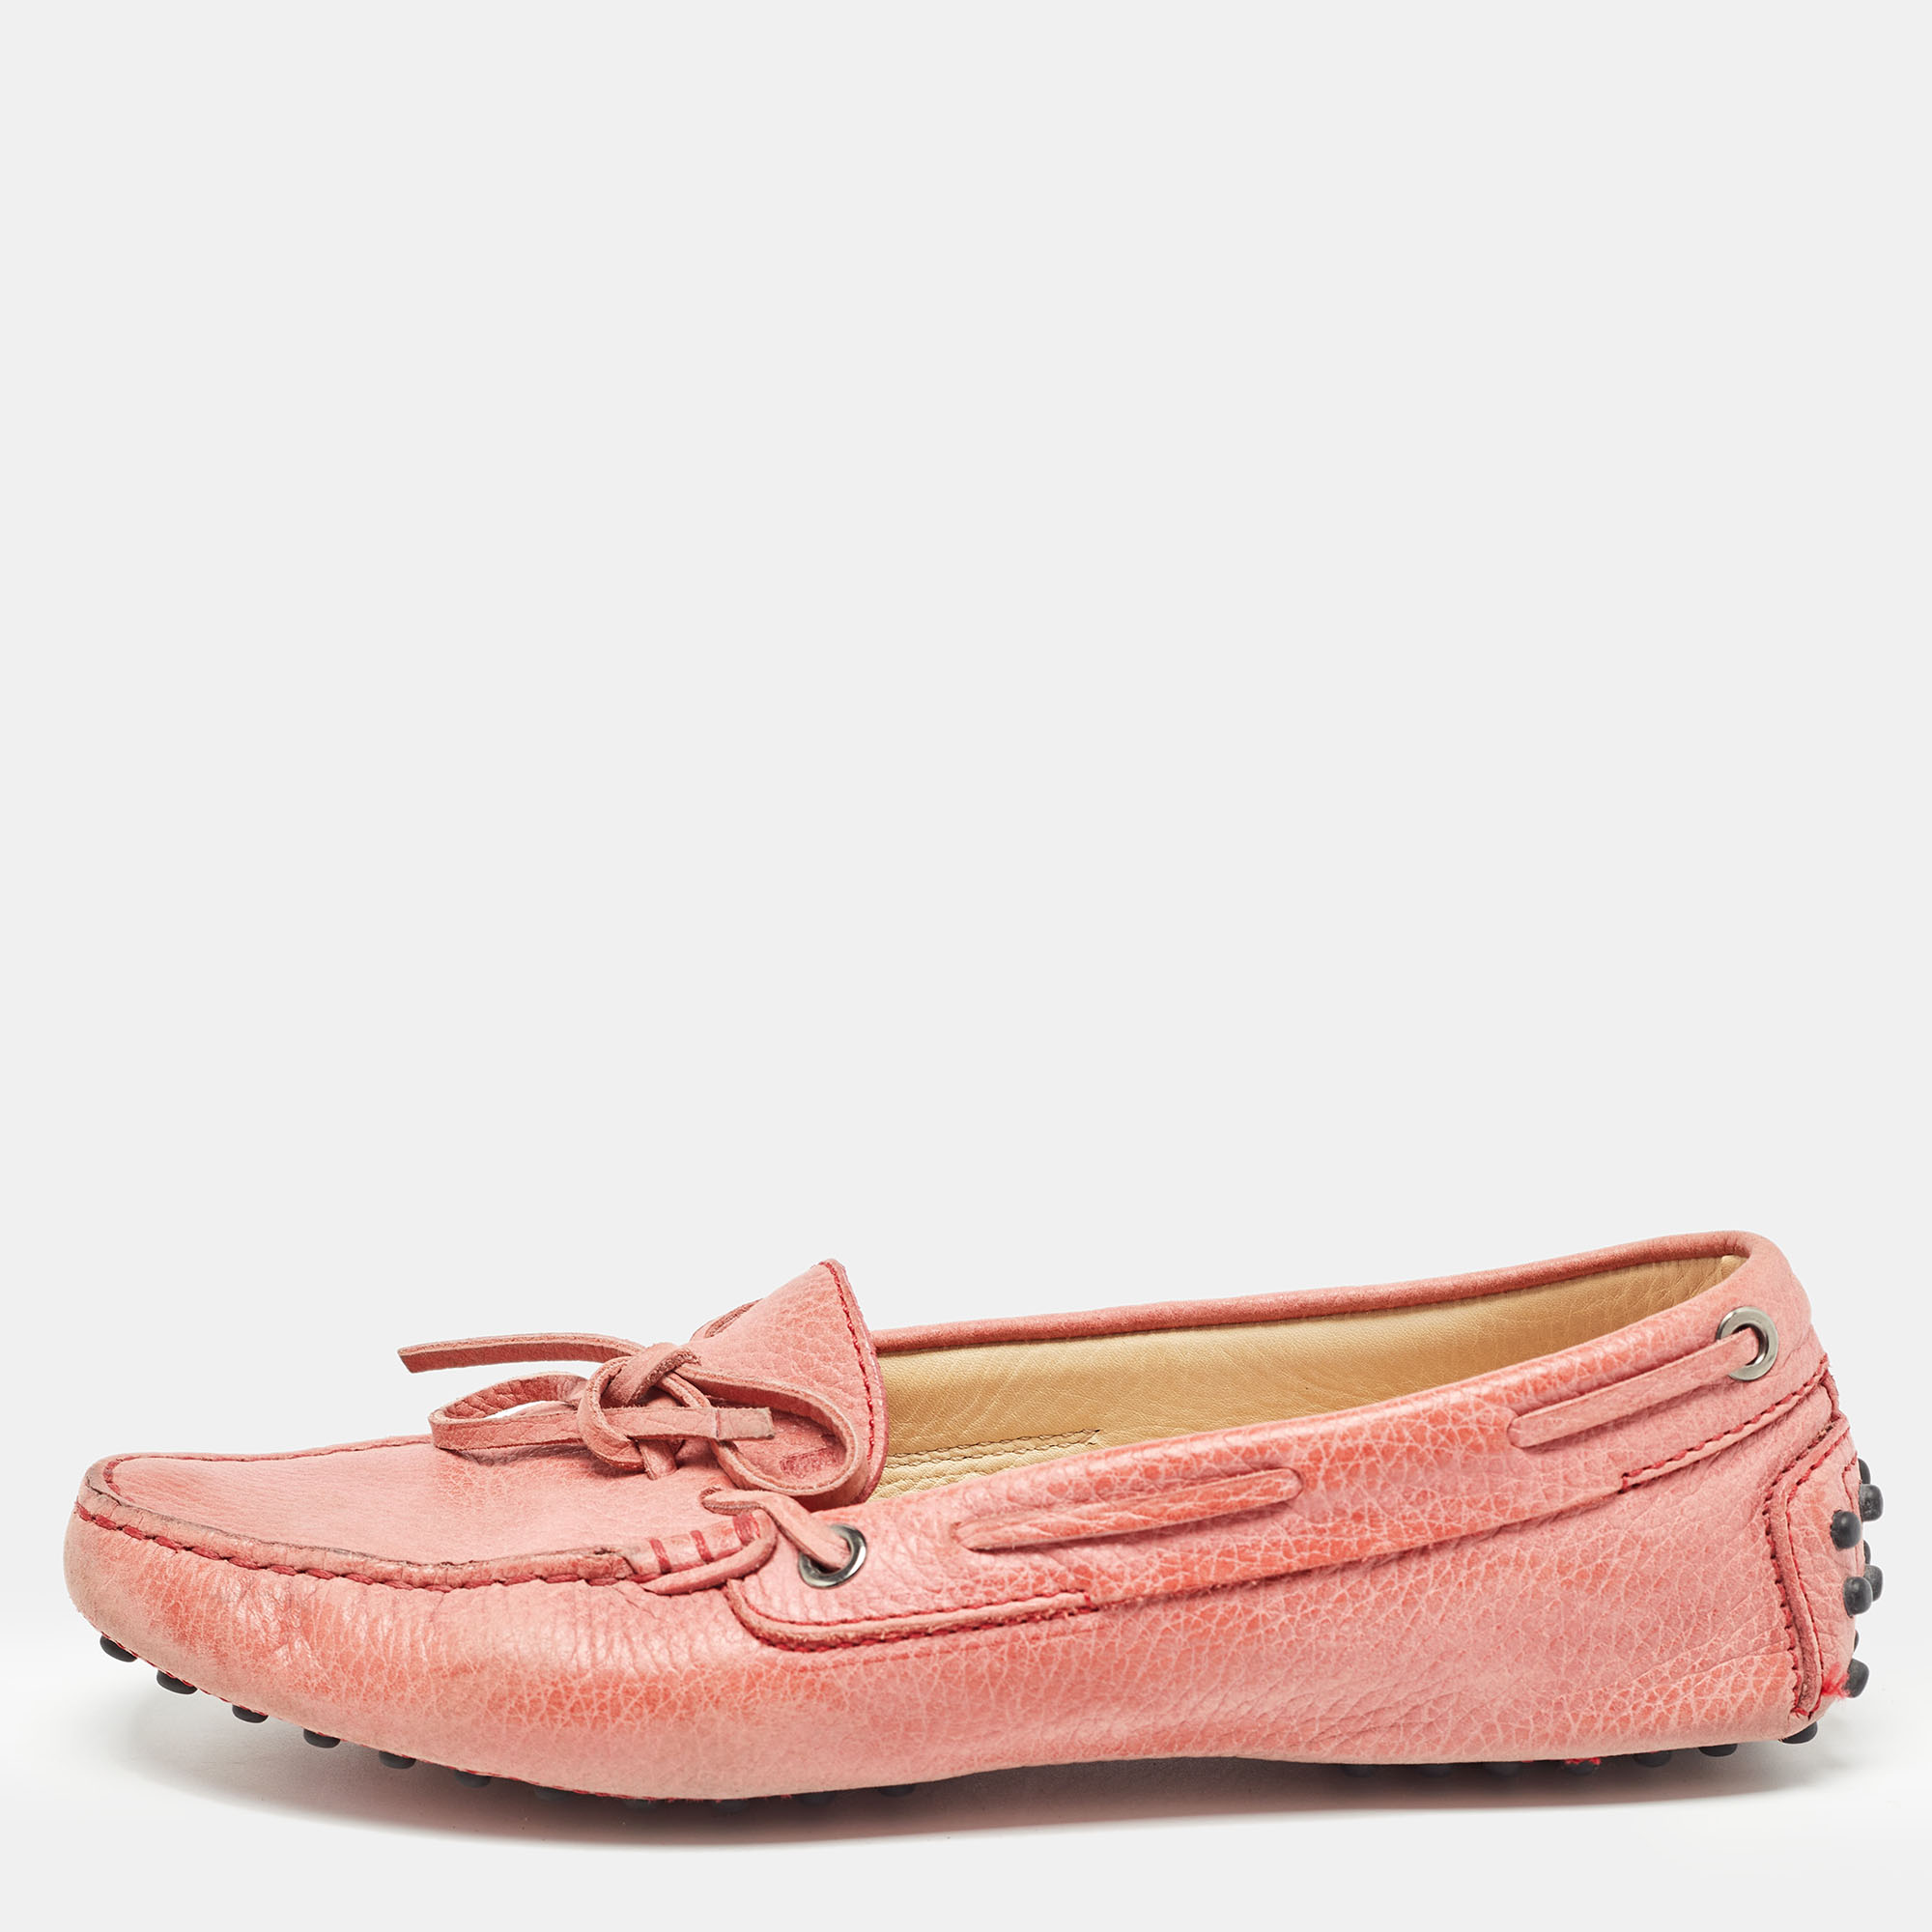 Tod's pink leather slip on  loafers  size 36.5